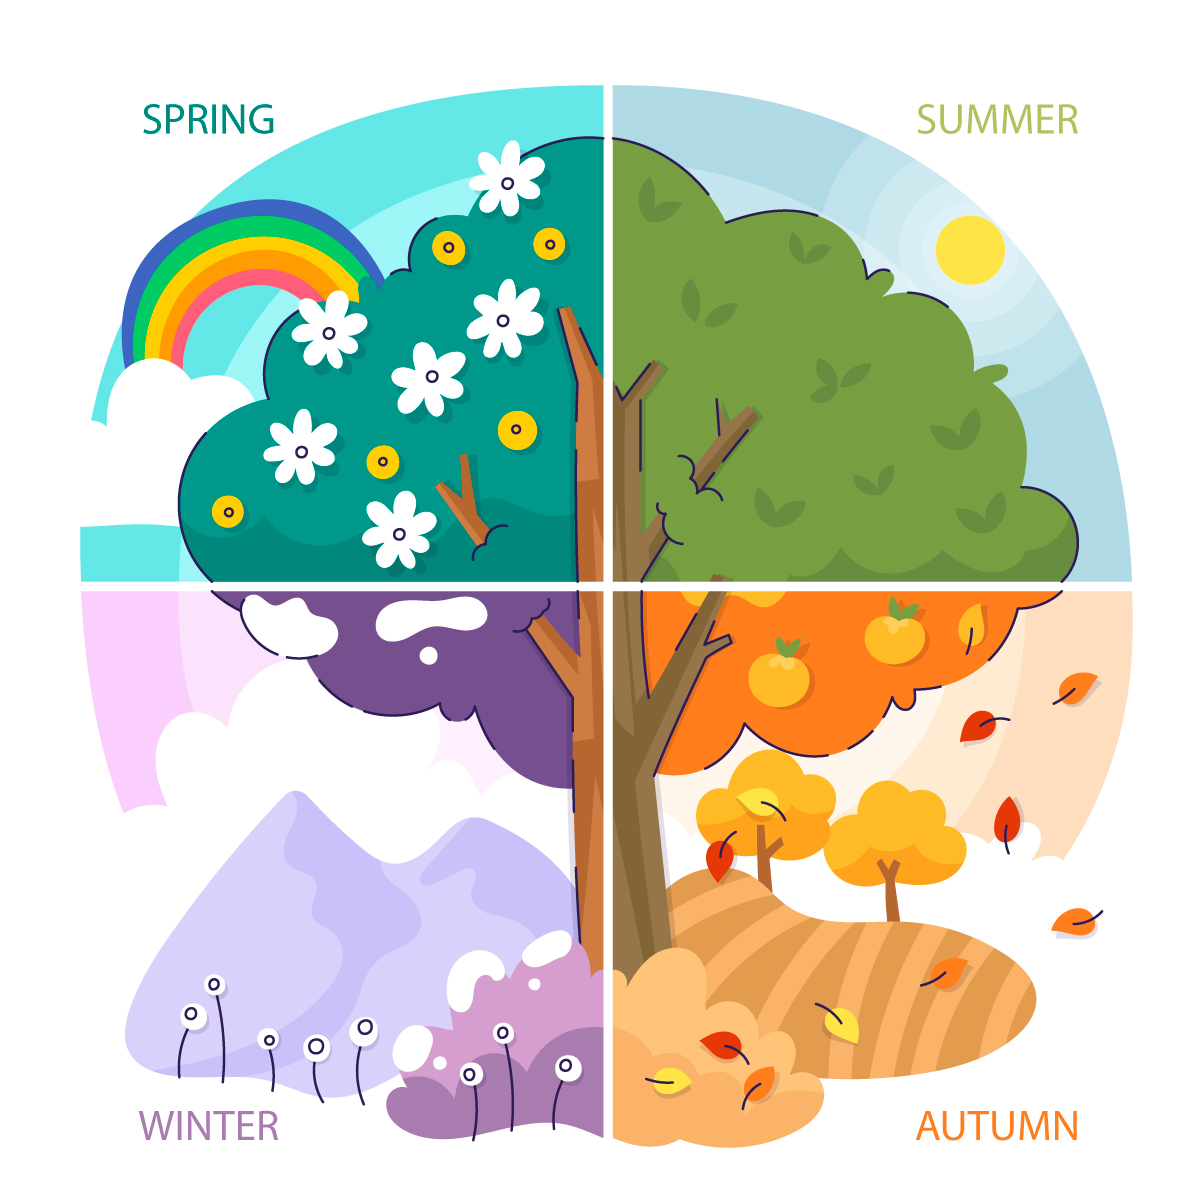 Seasons and the weather in Spanish